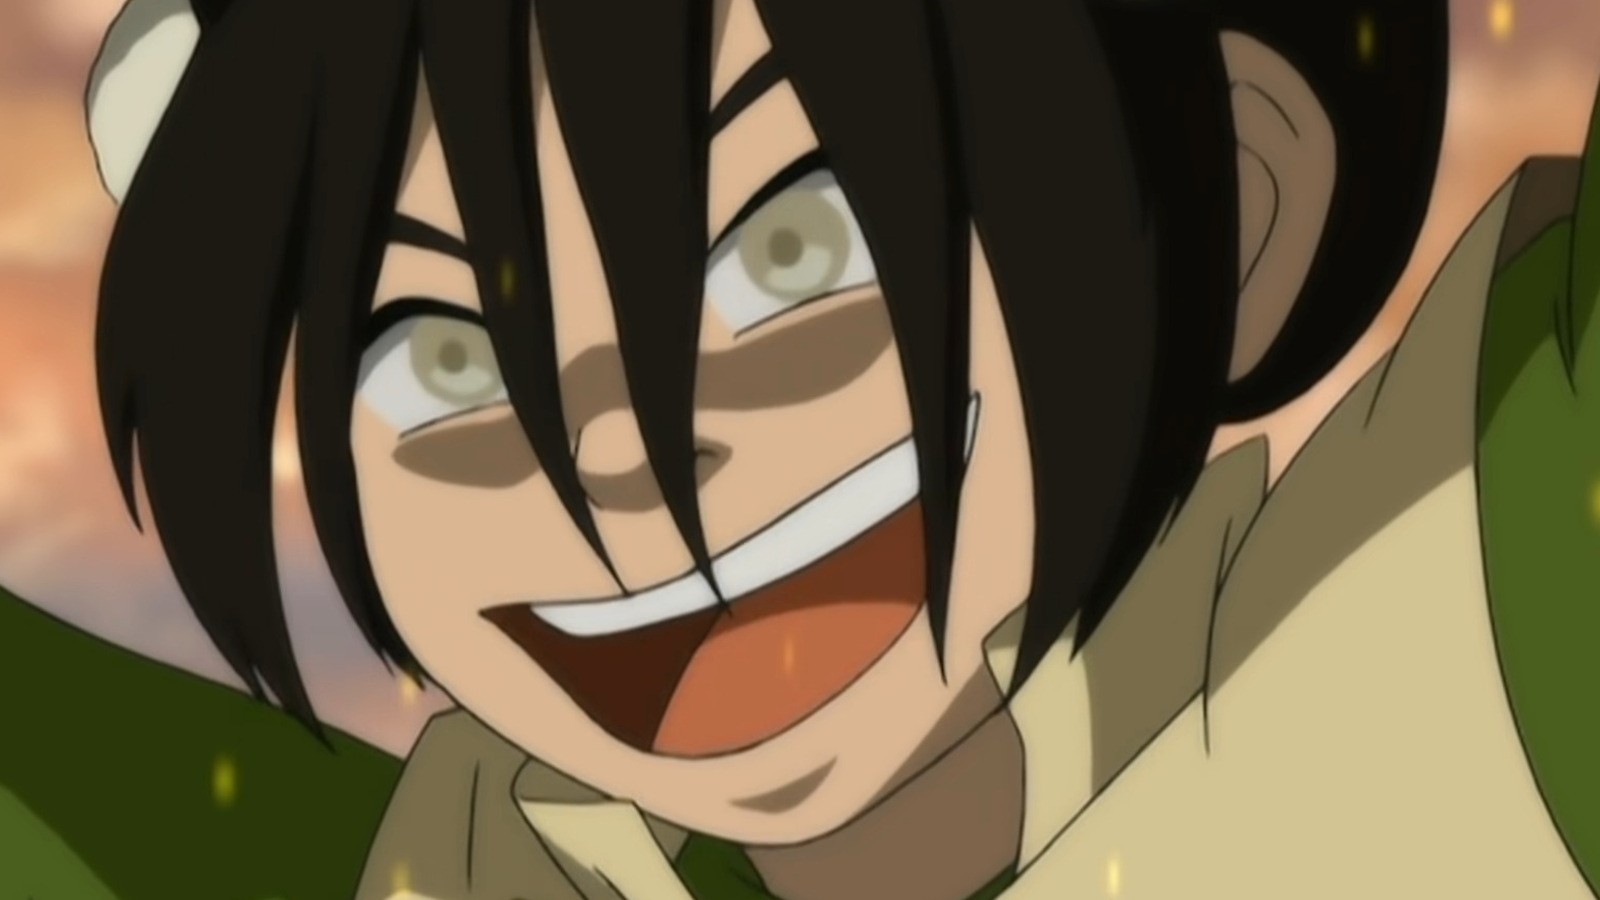 Toph in Avatar: The Last Airbender